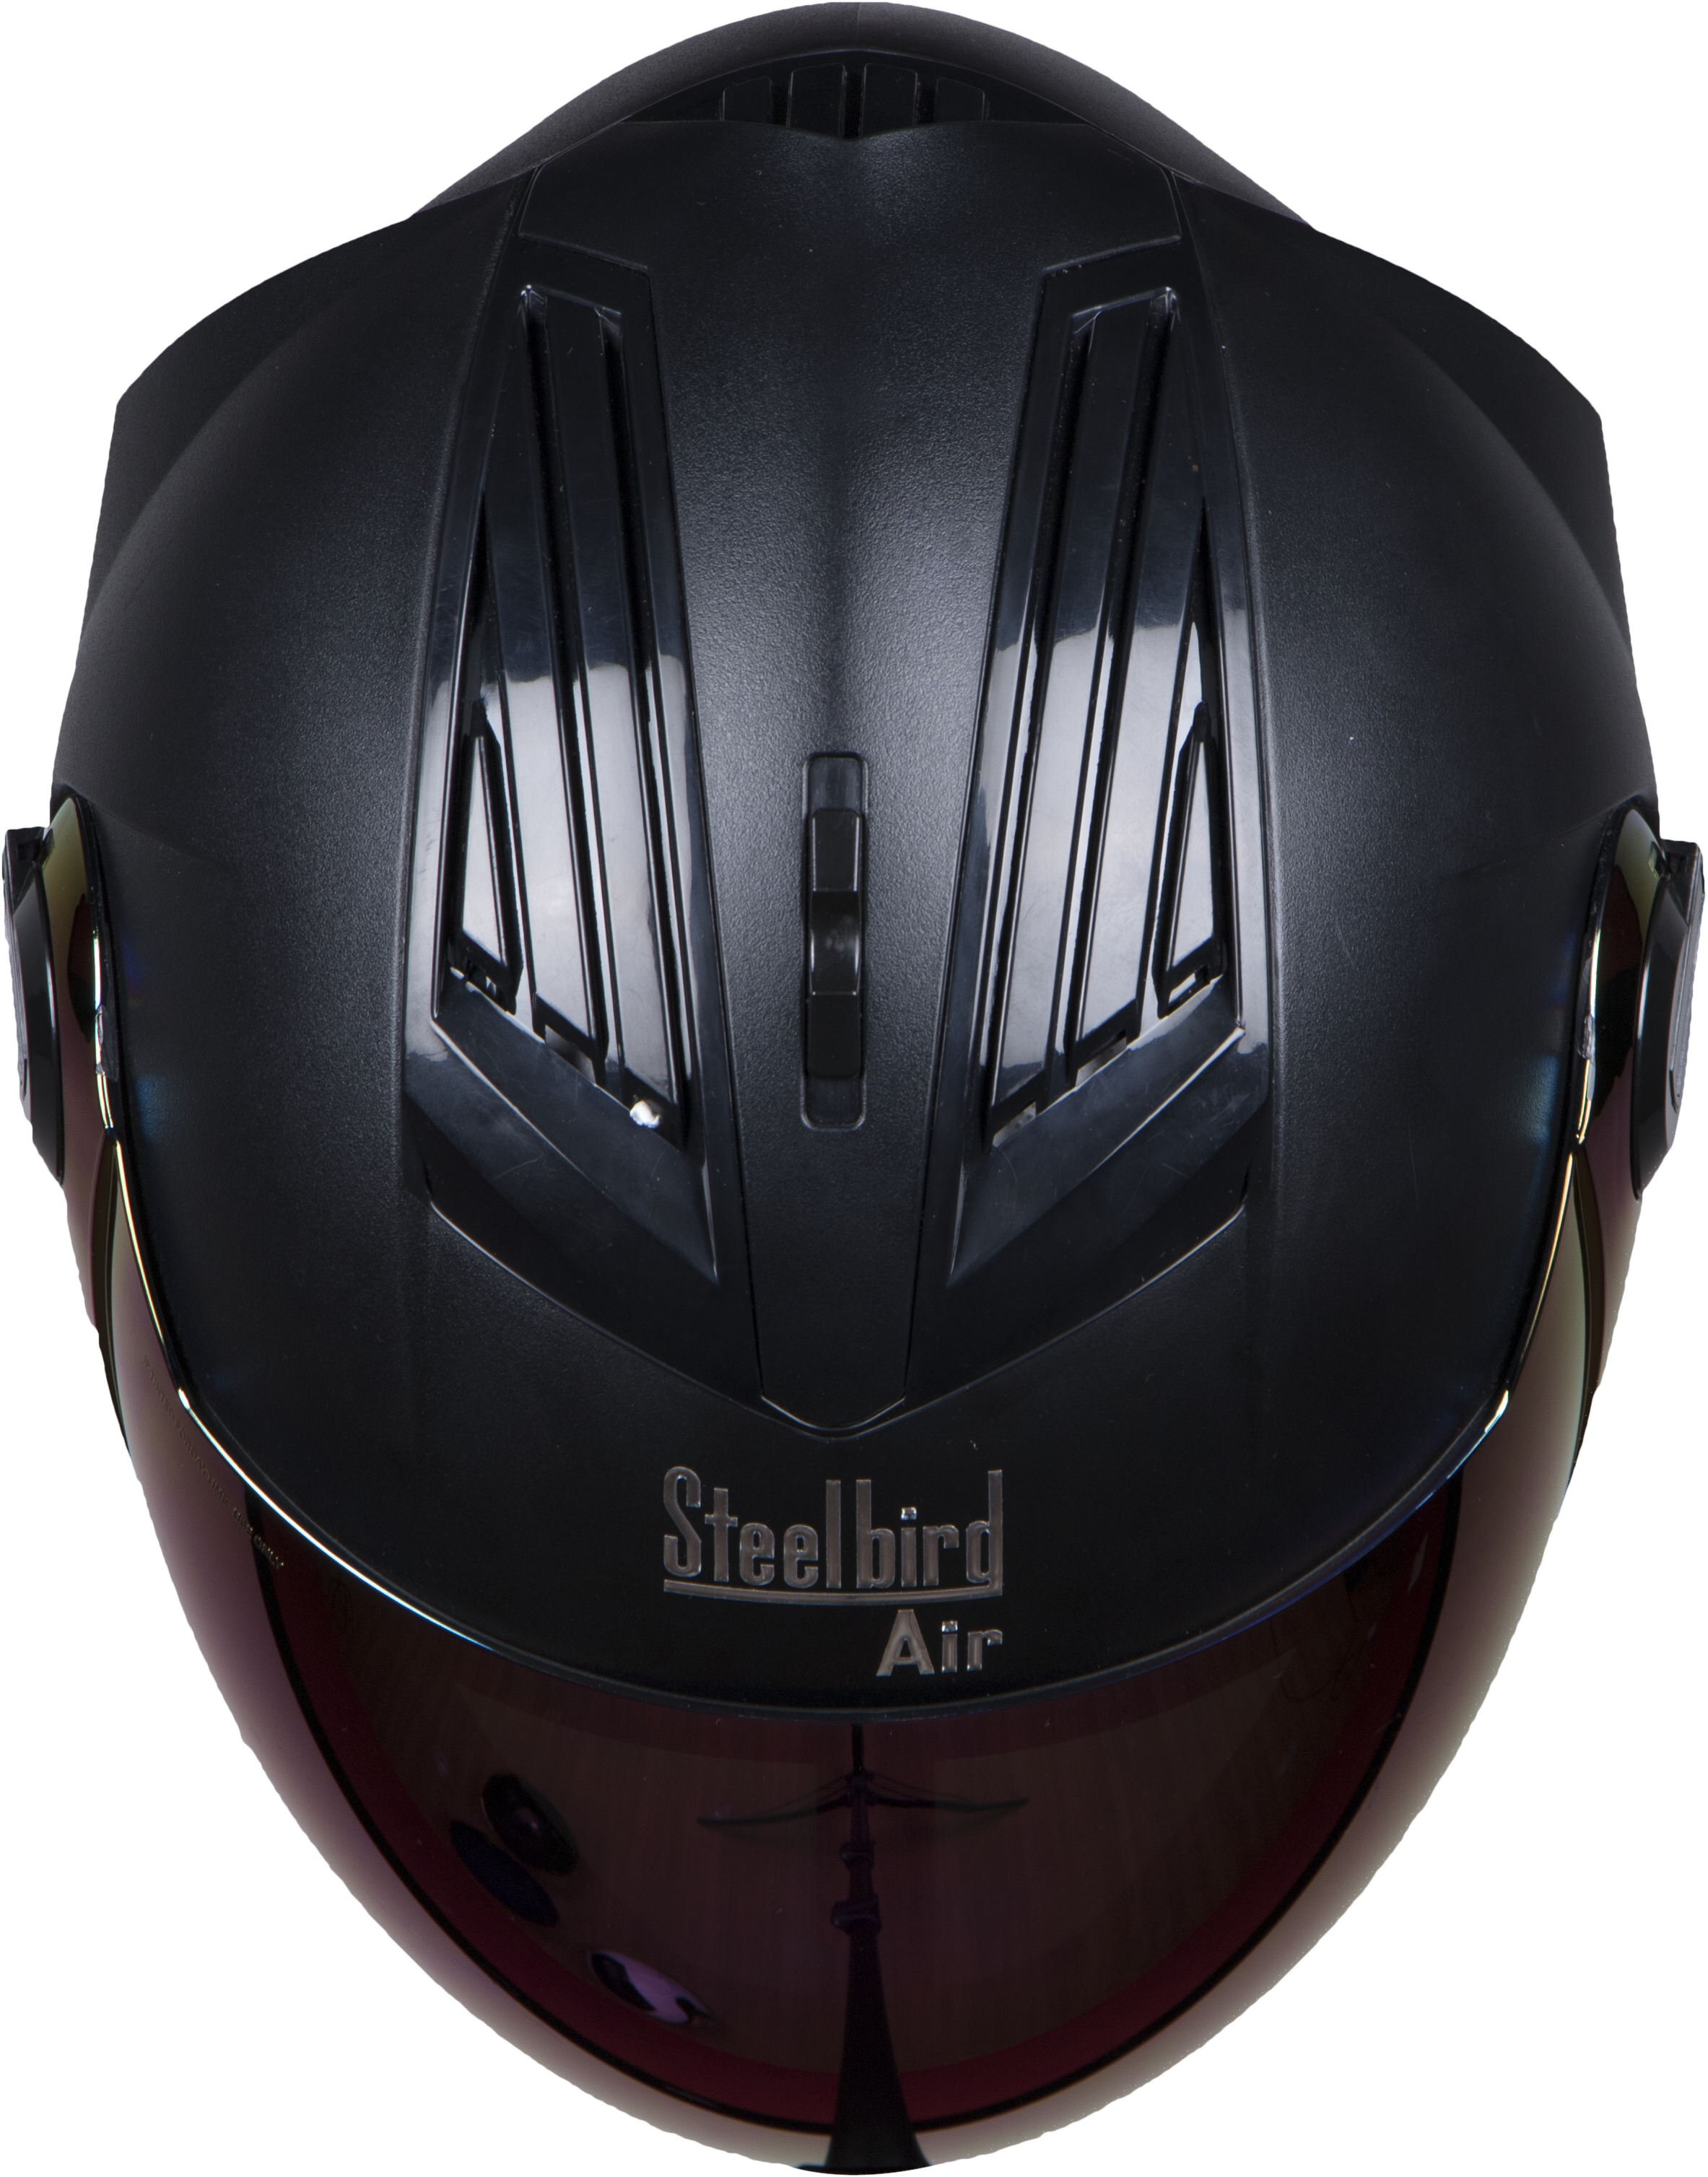 SBA-2 DASHING BLACK (FITTED WITH CLEAR VISOR EXTRA SILVER CHROME VISOR FREE)